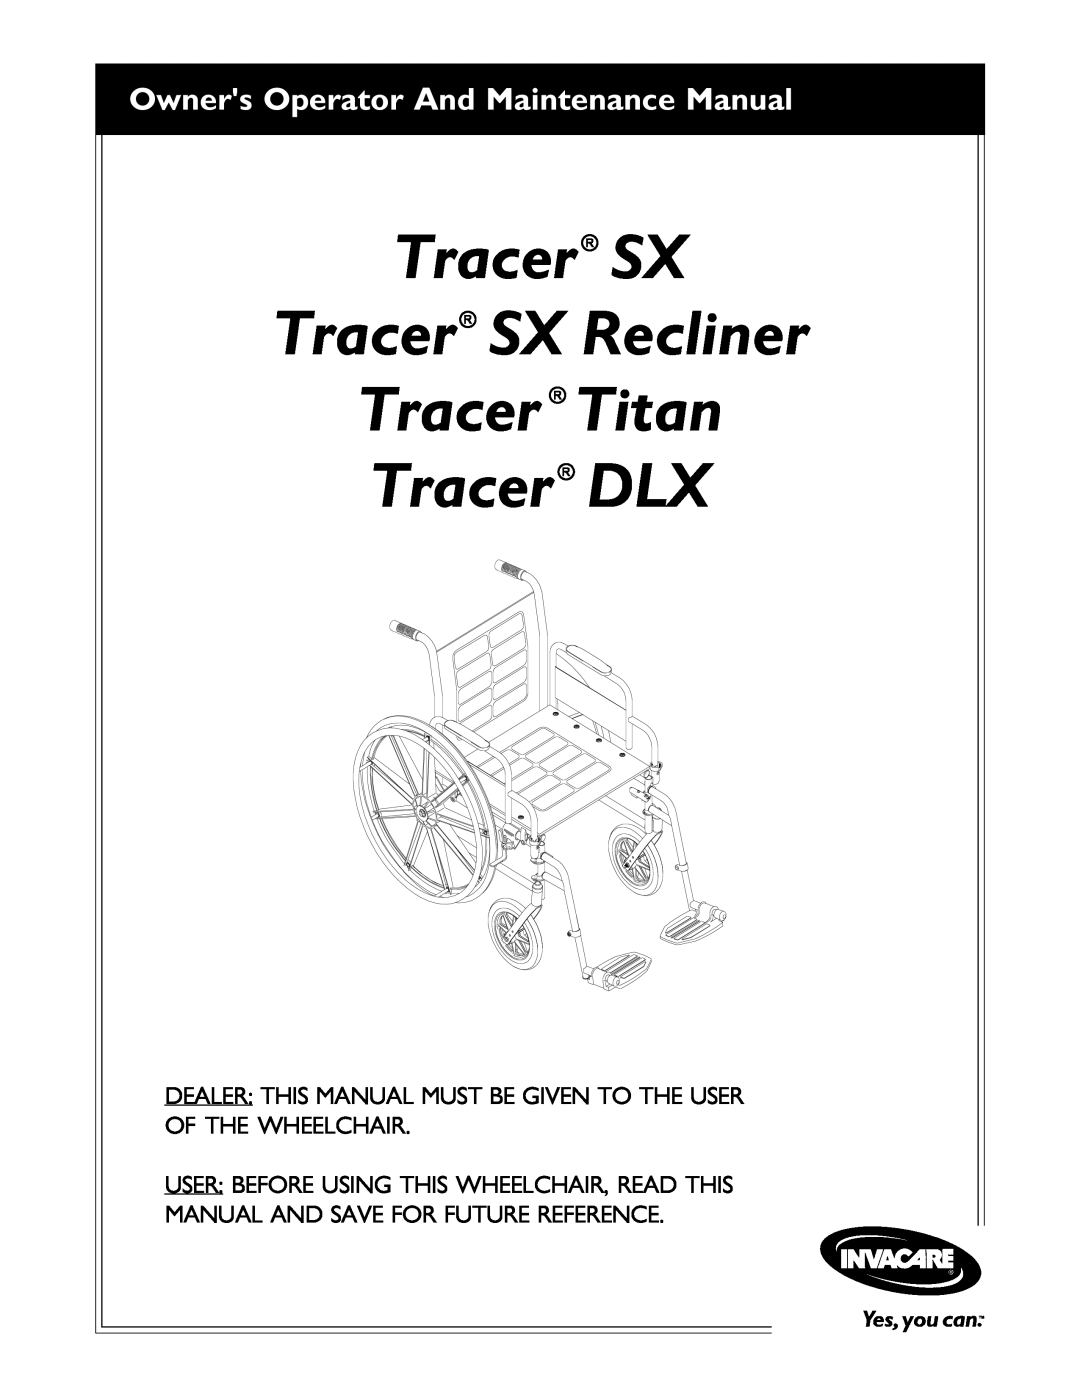 Invacare SX Recliner, Tracer Titan, Tracer DLX, Tracer SX manual Owners Operator And Maintenance Manual 